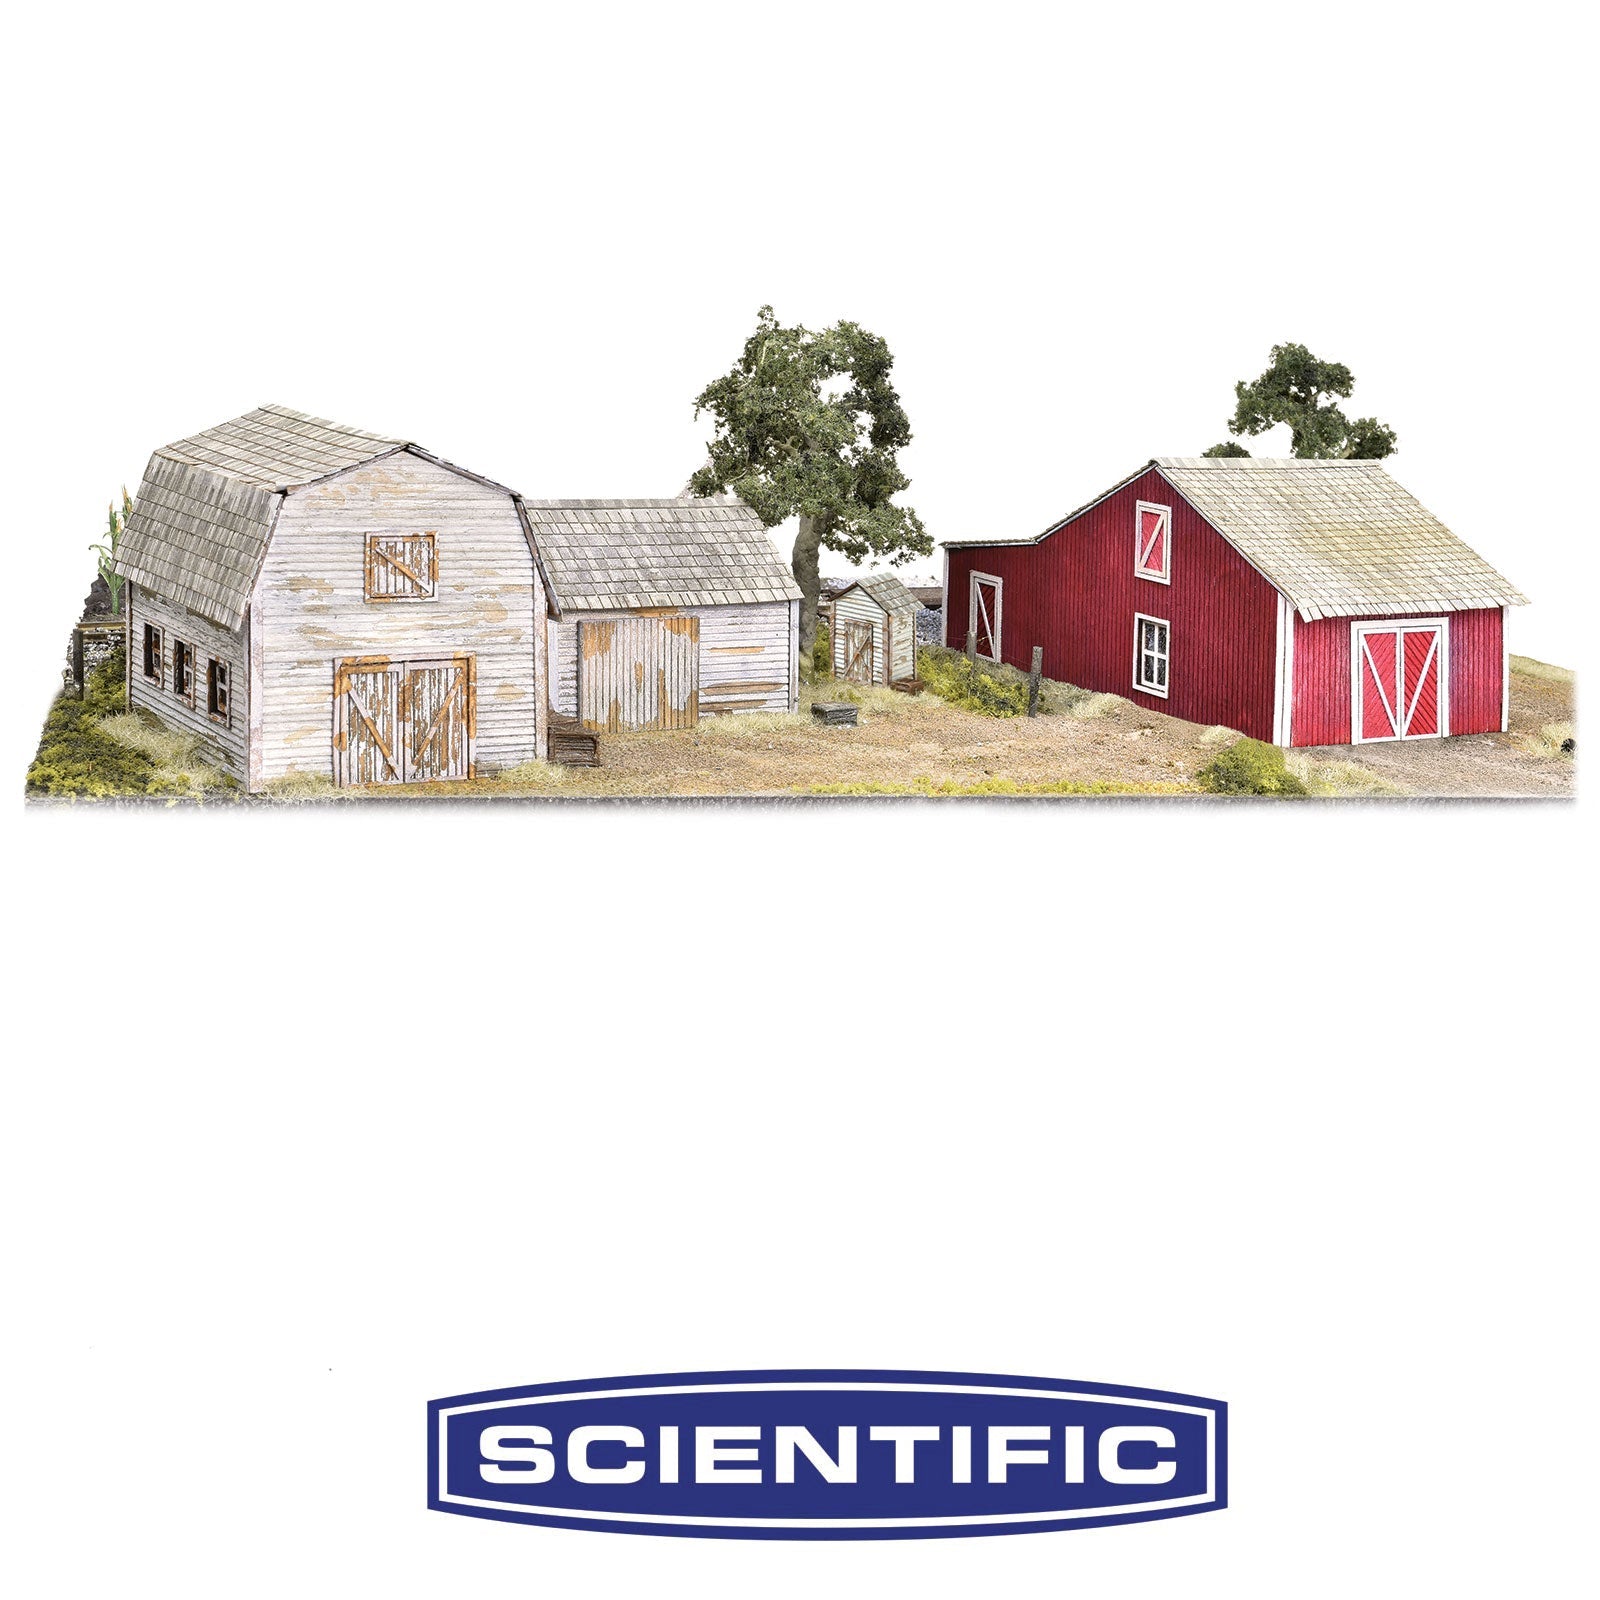 Rural Farm Structures, Deluxe Set of 4 Kits, HO Scale, by Scientific